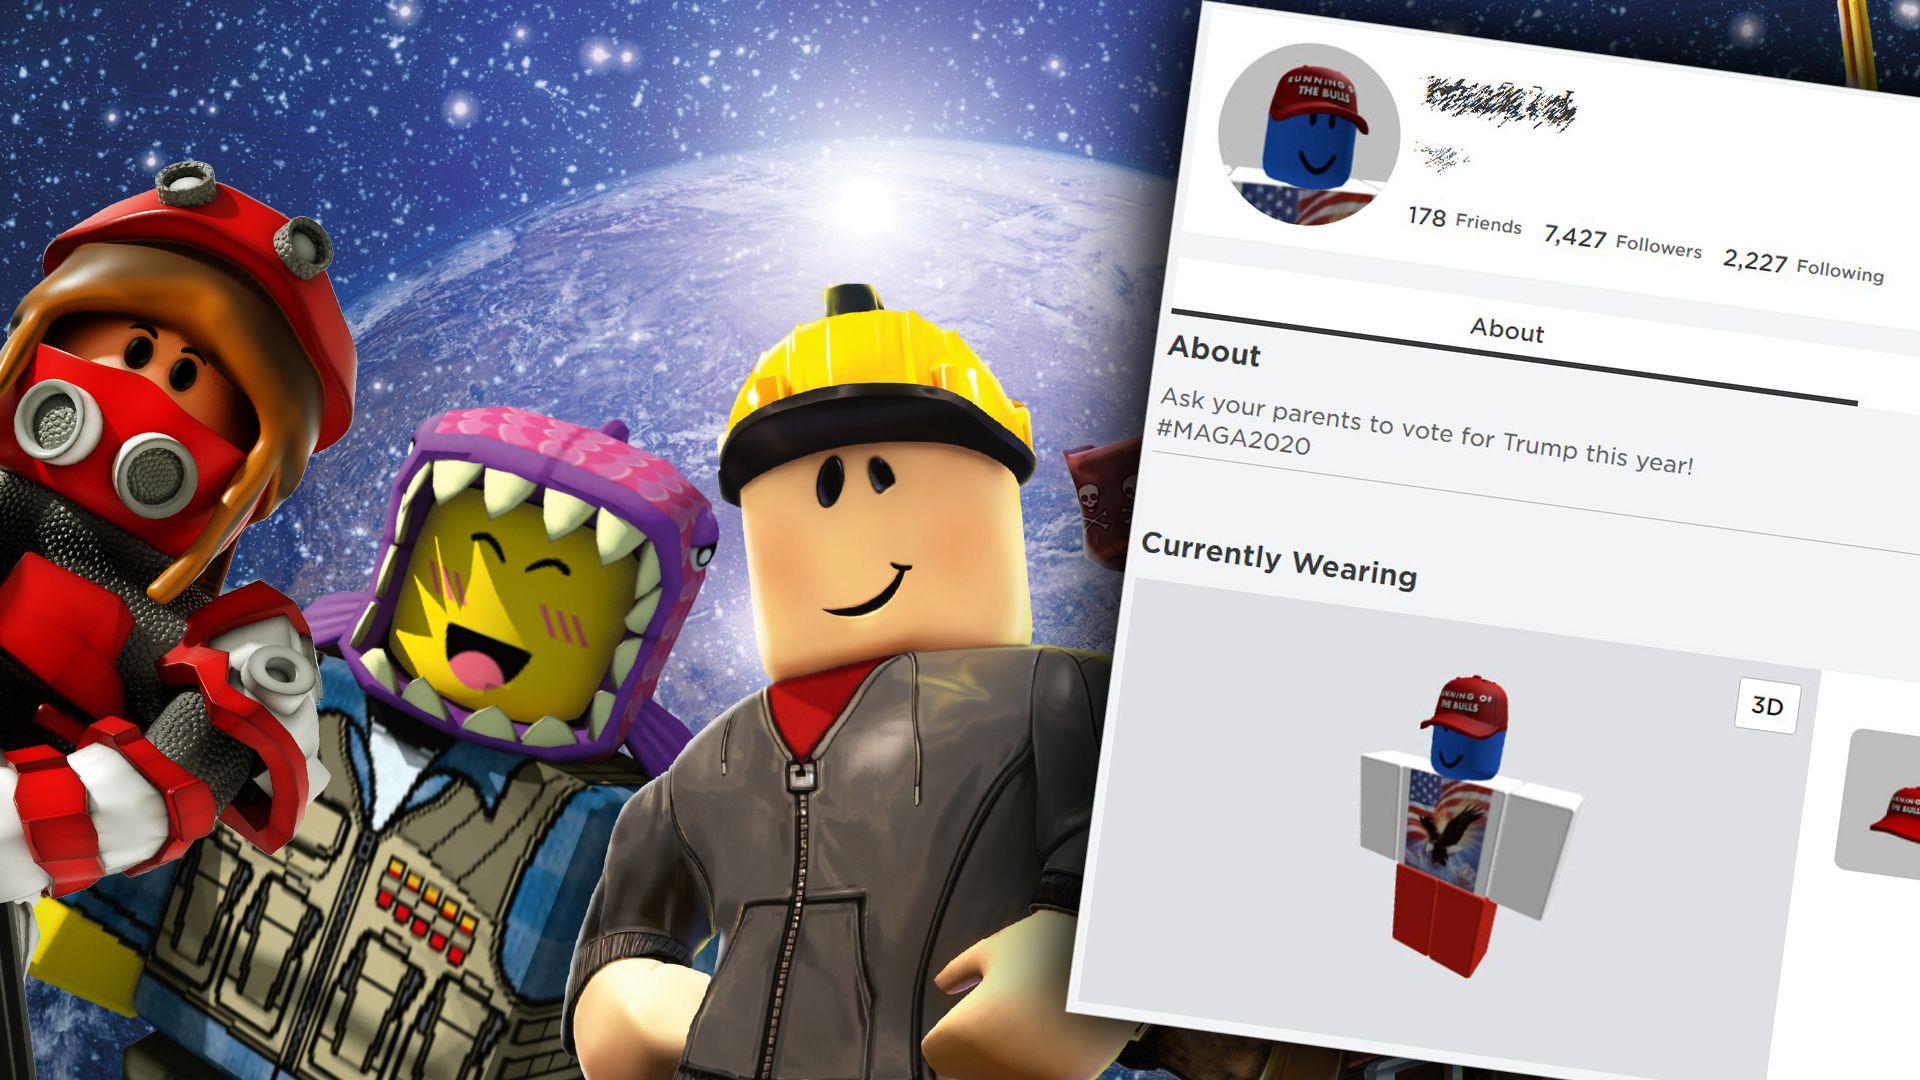 200,000 Roblox Accounts Are At Risk Of Being Hacked. Fact Or Myth